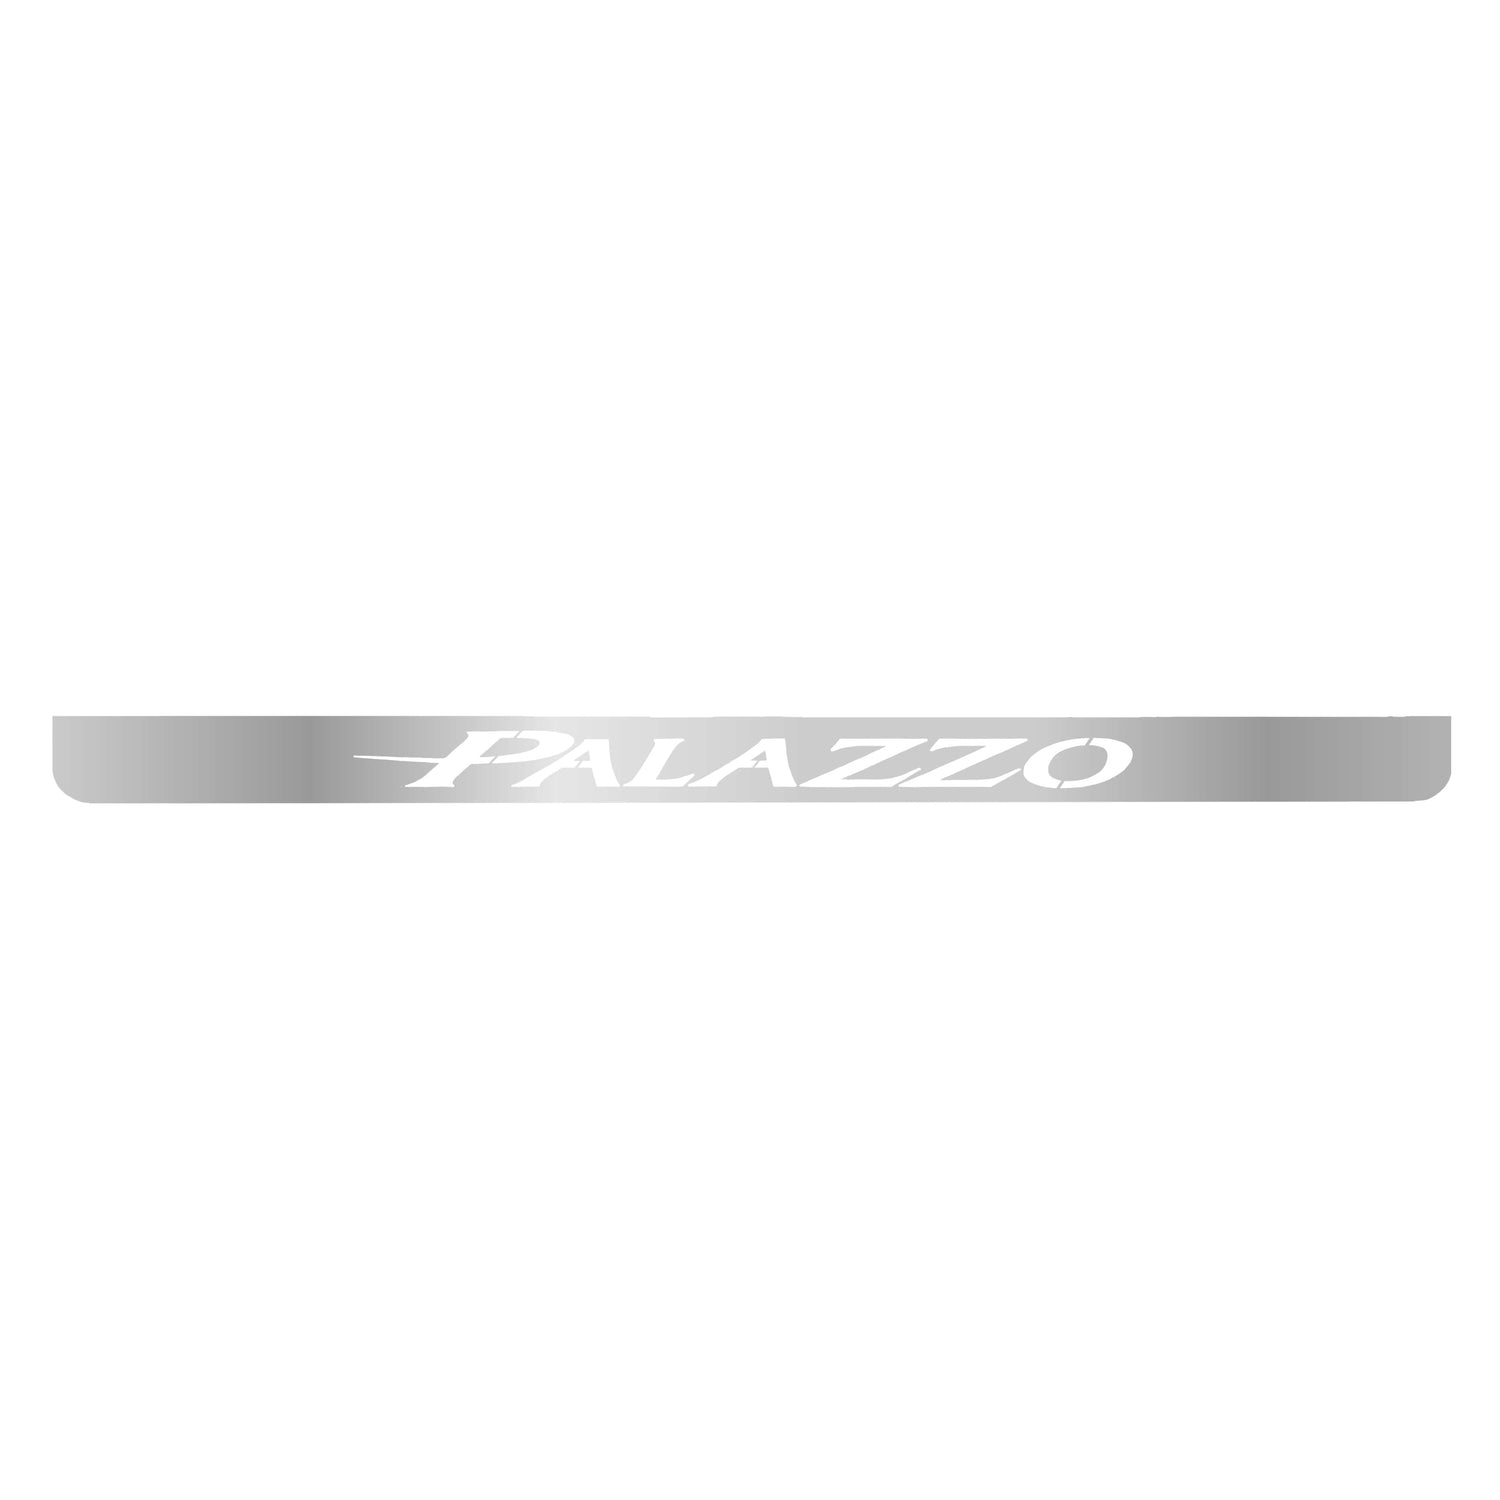 Future-Sales-Palazzo-Face-Plate-stainless-steel-mirror-finish-Height-6-Width-94-backer-plate-SS-PALZ-01S